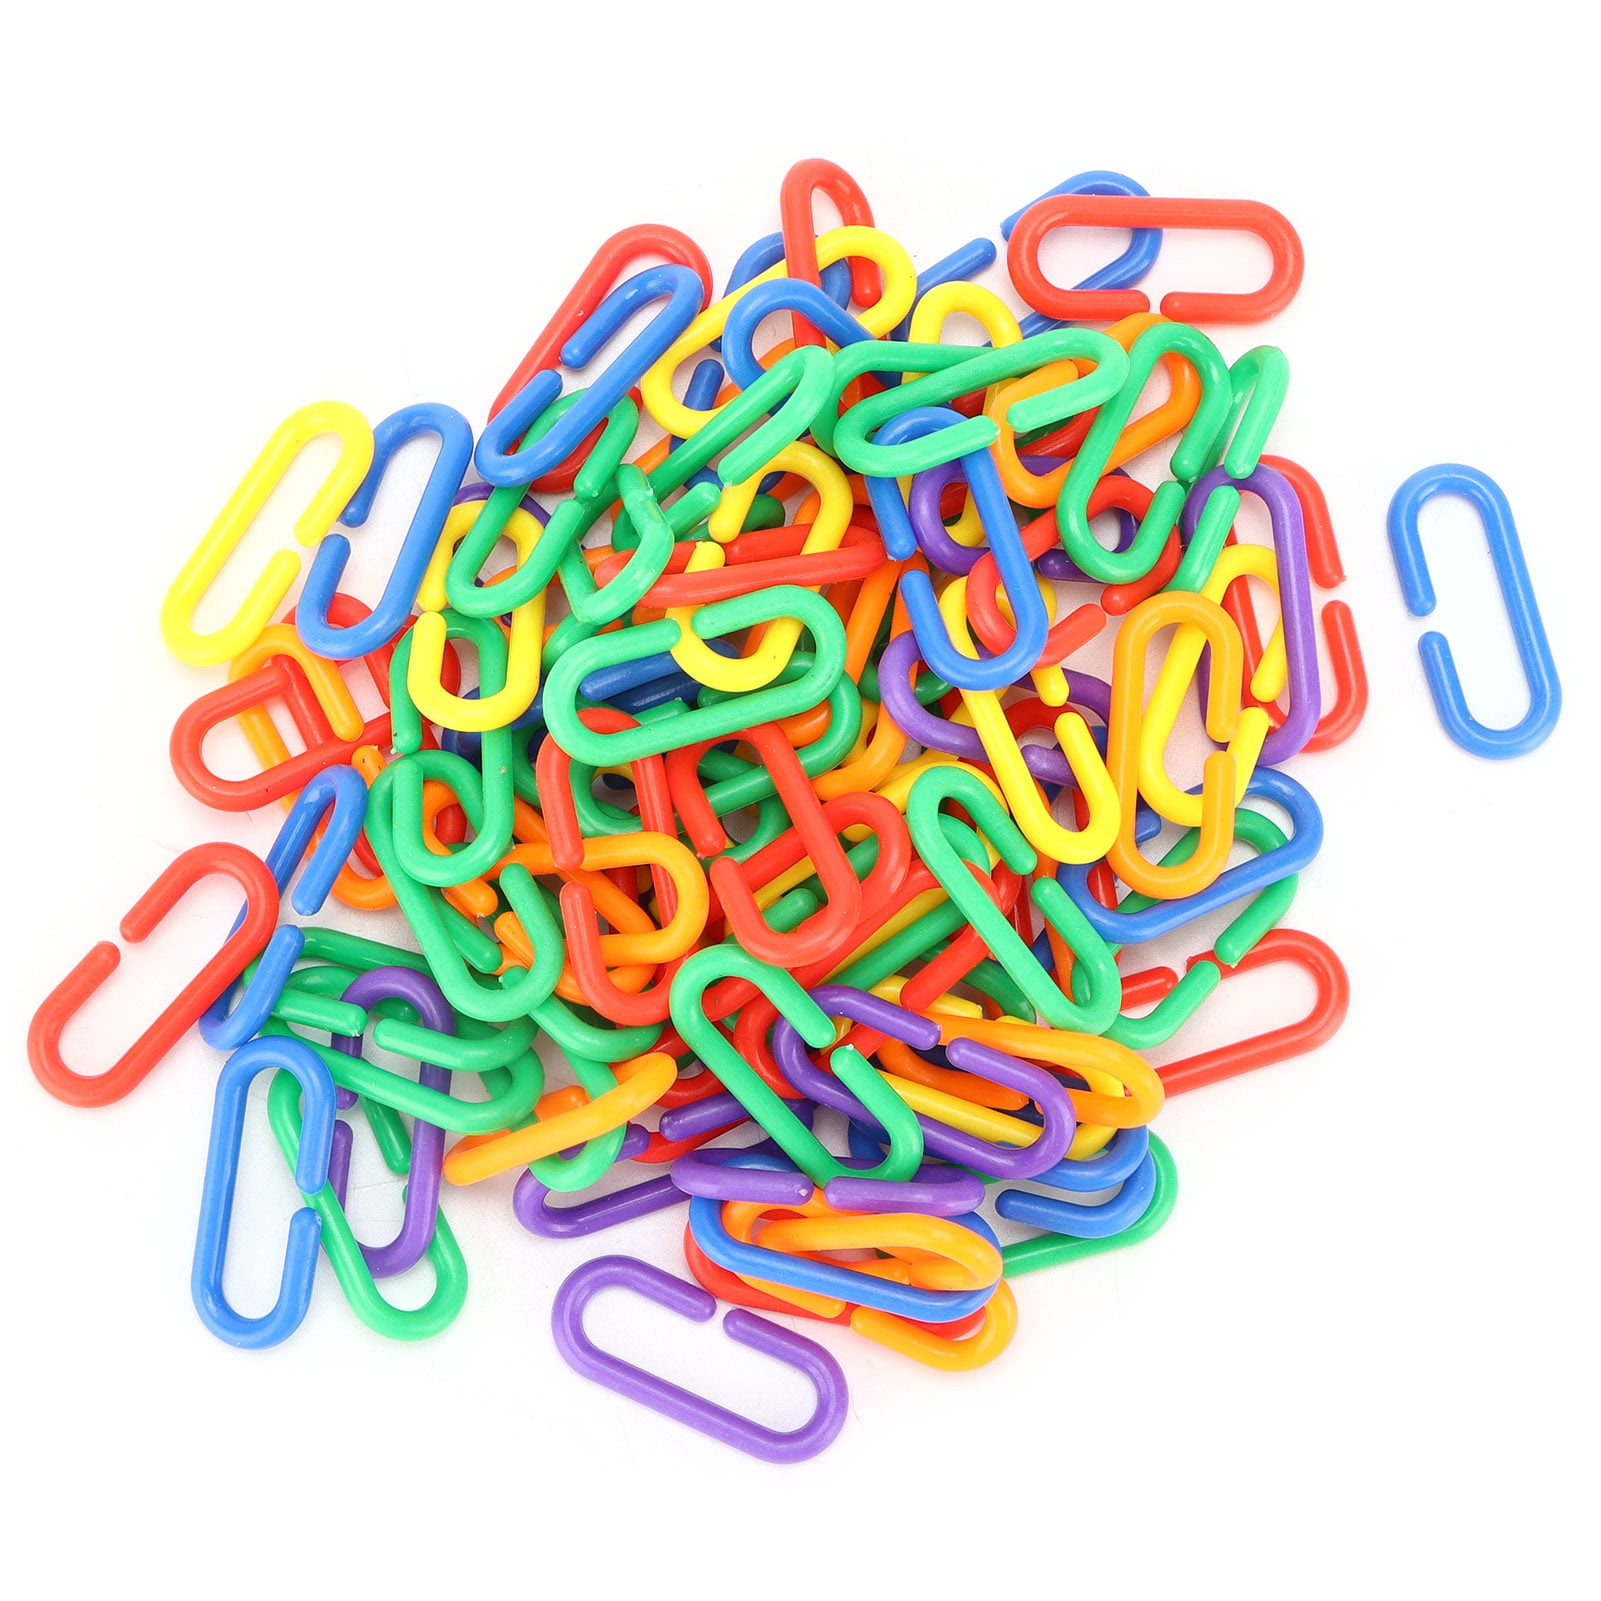 100 Plastic C-Clips (Choose Color) Chain Links Sugar Glider Bird Toy Parts